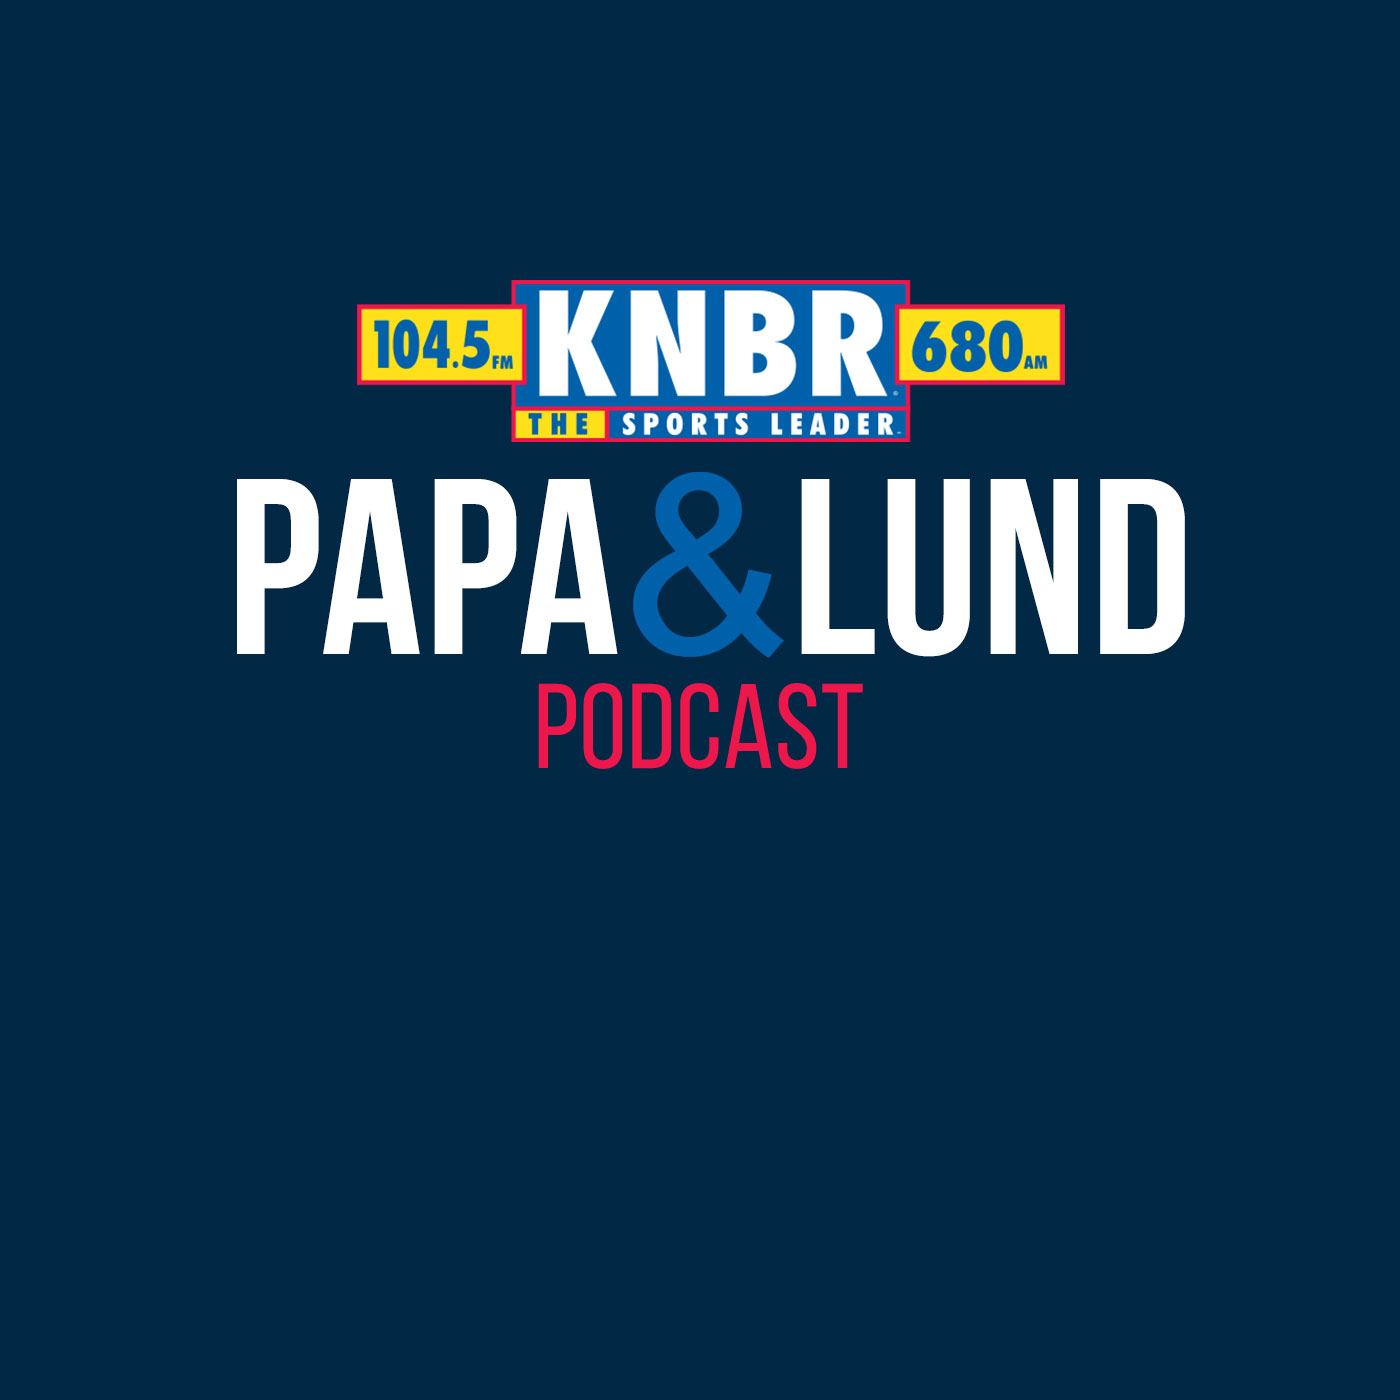 7-29 Eric Byrnes joins Papa & Lund to discuss what Will Clark meant to him growing up and the impact that he had on him and Giants fans of the 90s and beyond